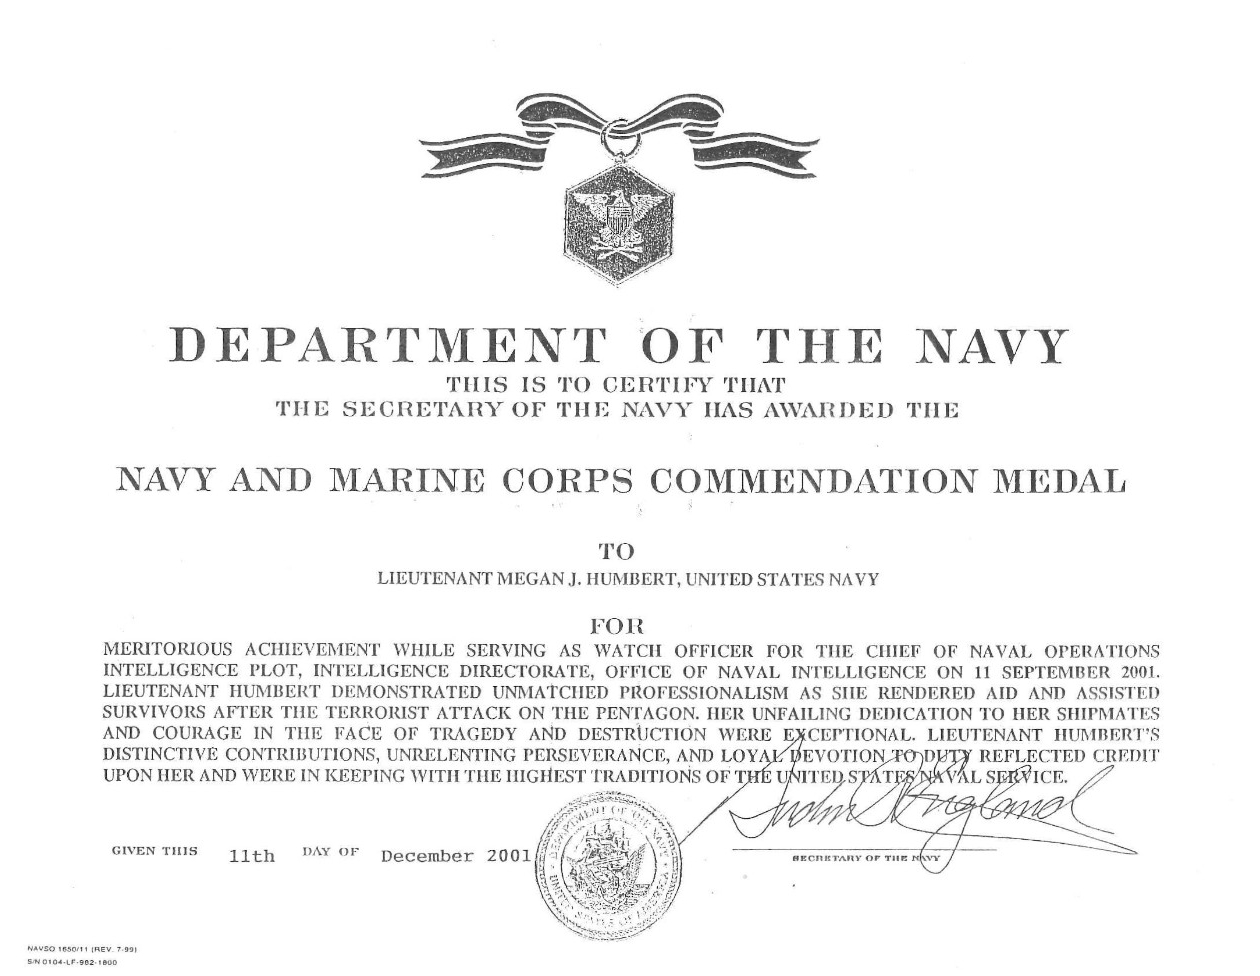 Humbert, Megan LT Navy and Marine Corps Commendation Medal